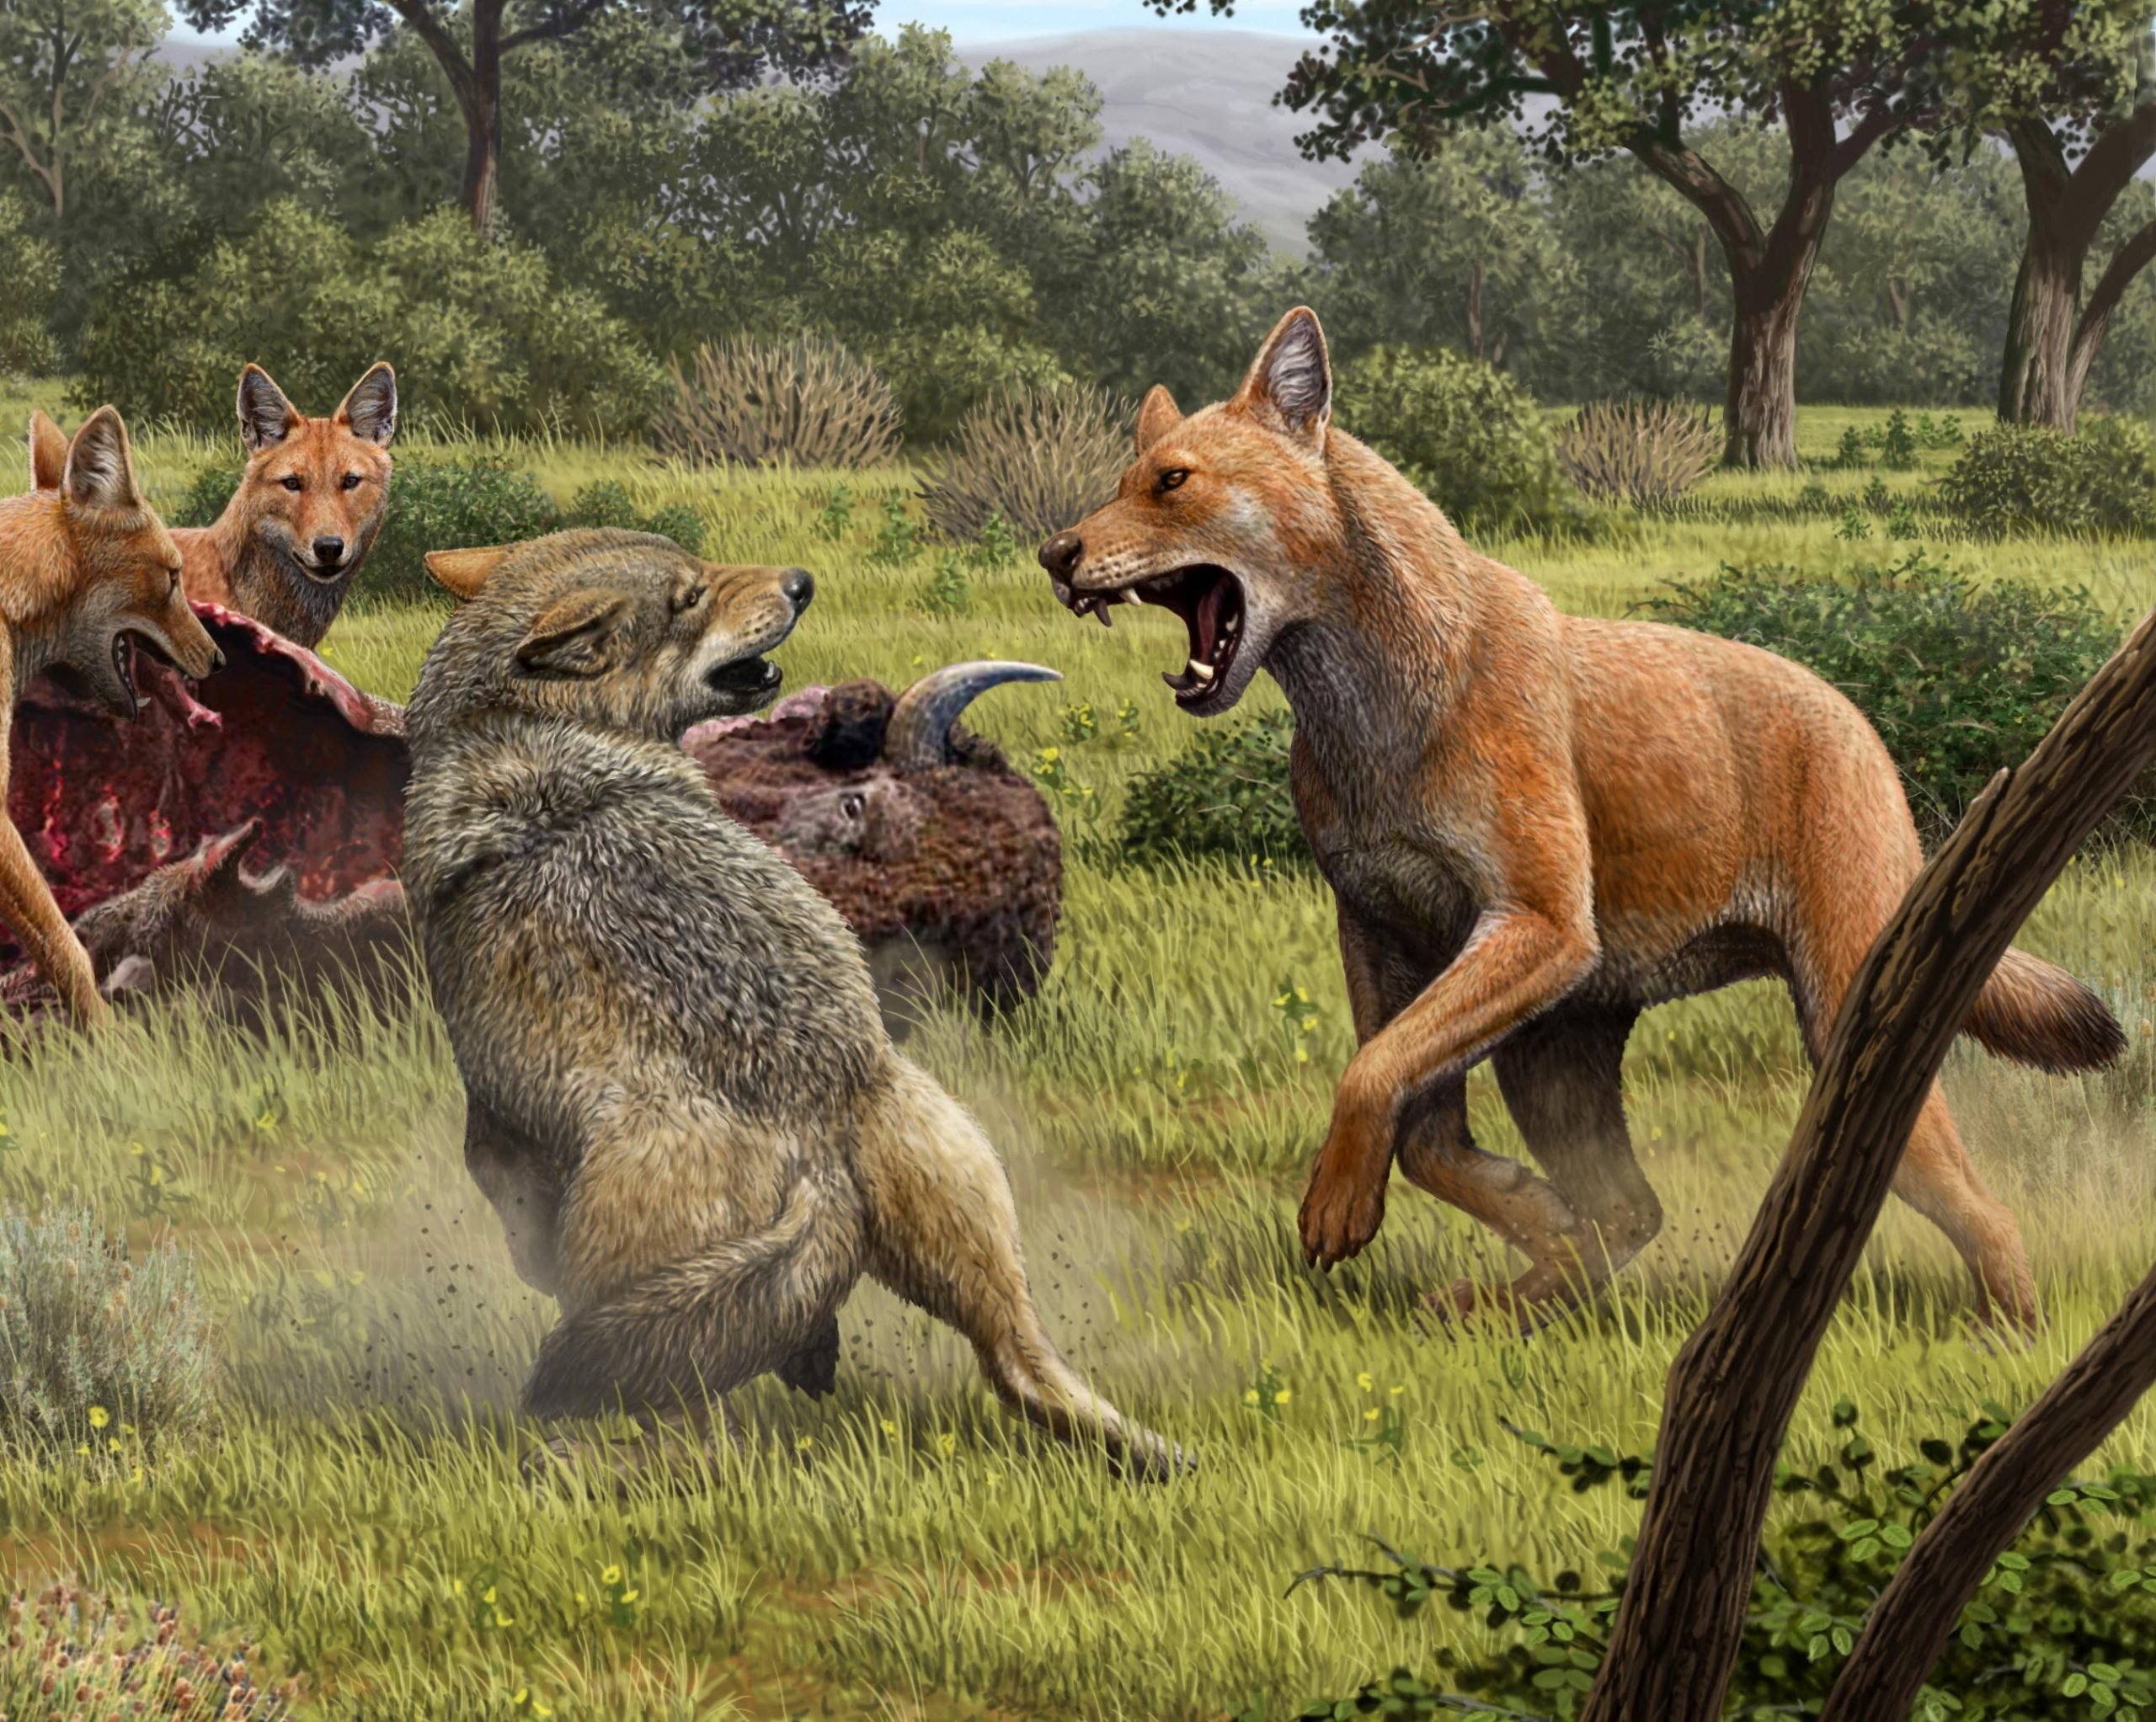 Ancient DNA Reveals Secrets of the “Scary” Dire Wolf – Famous from the Game of Thrones